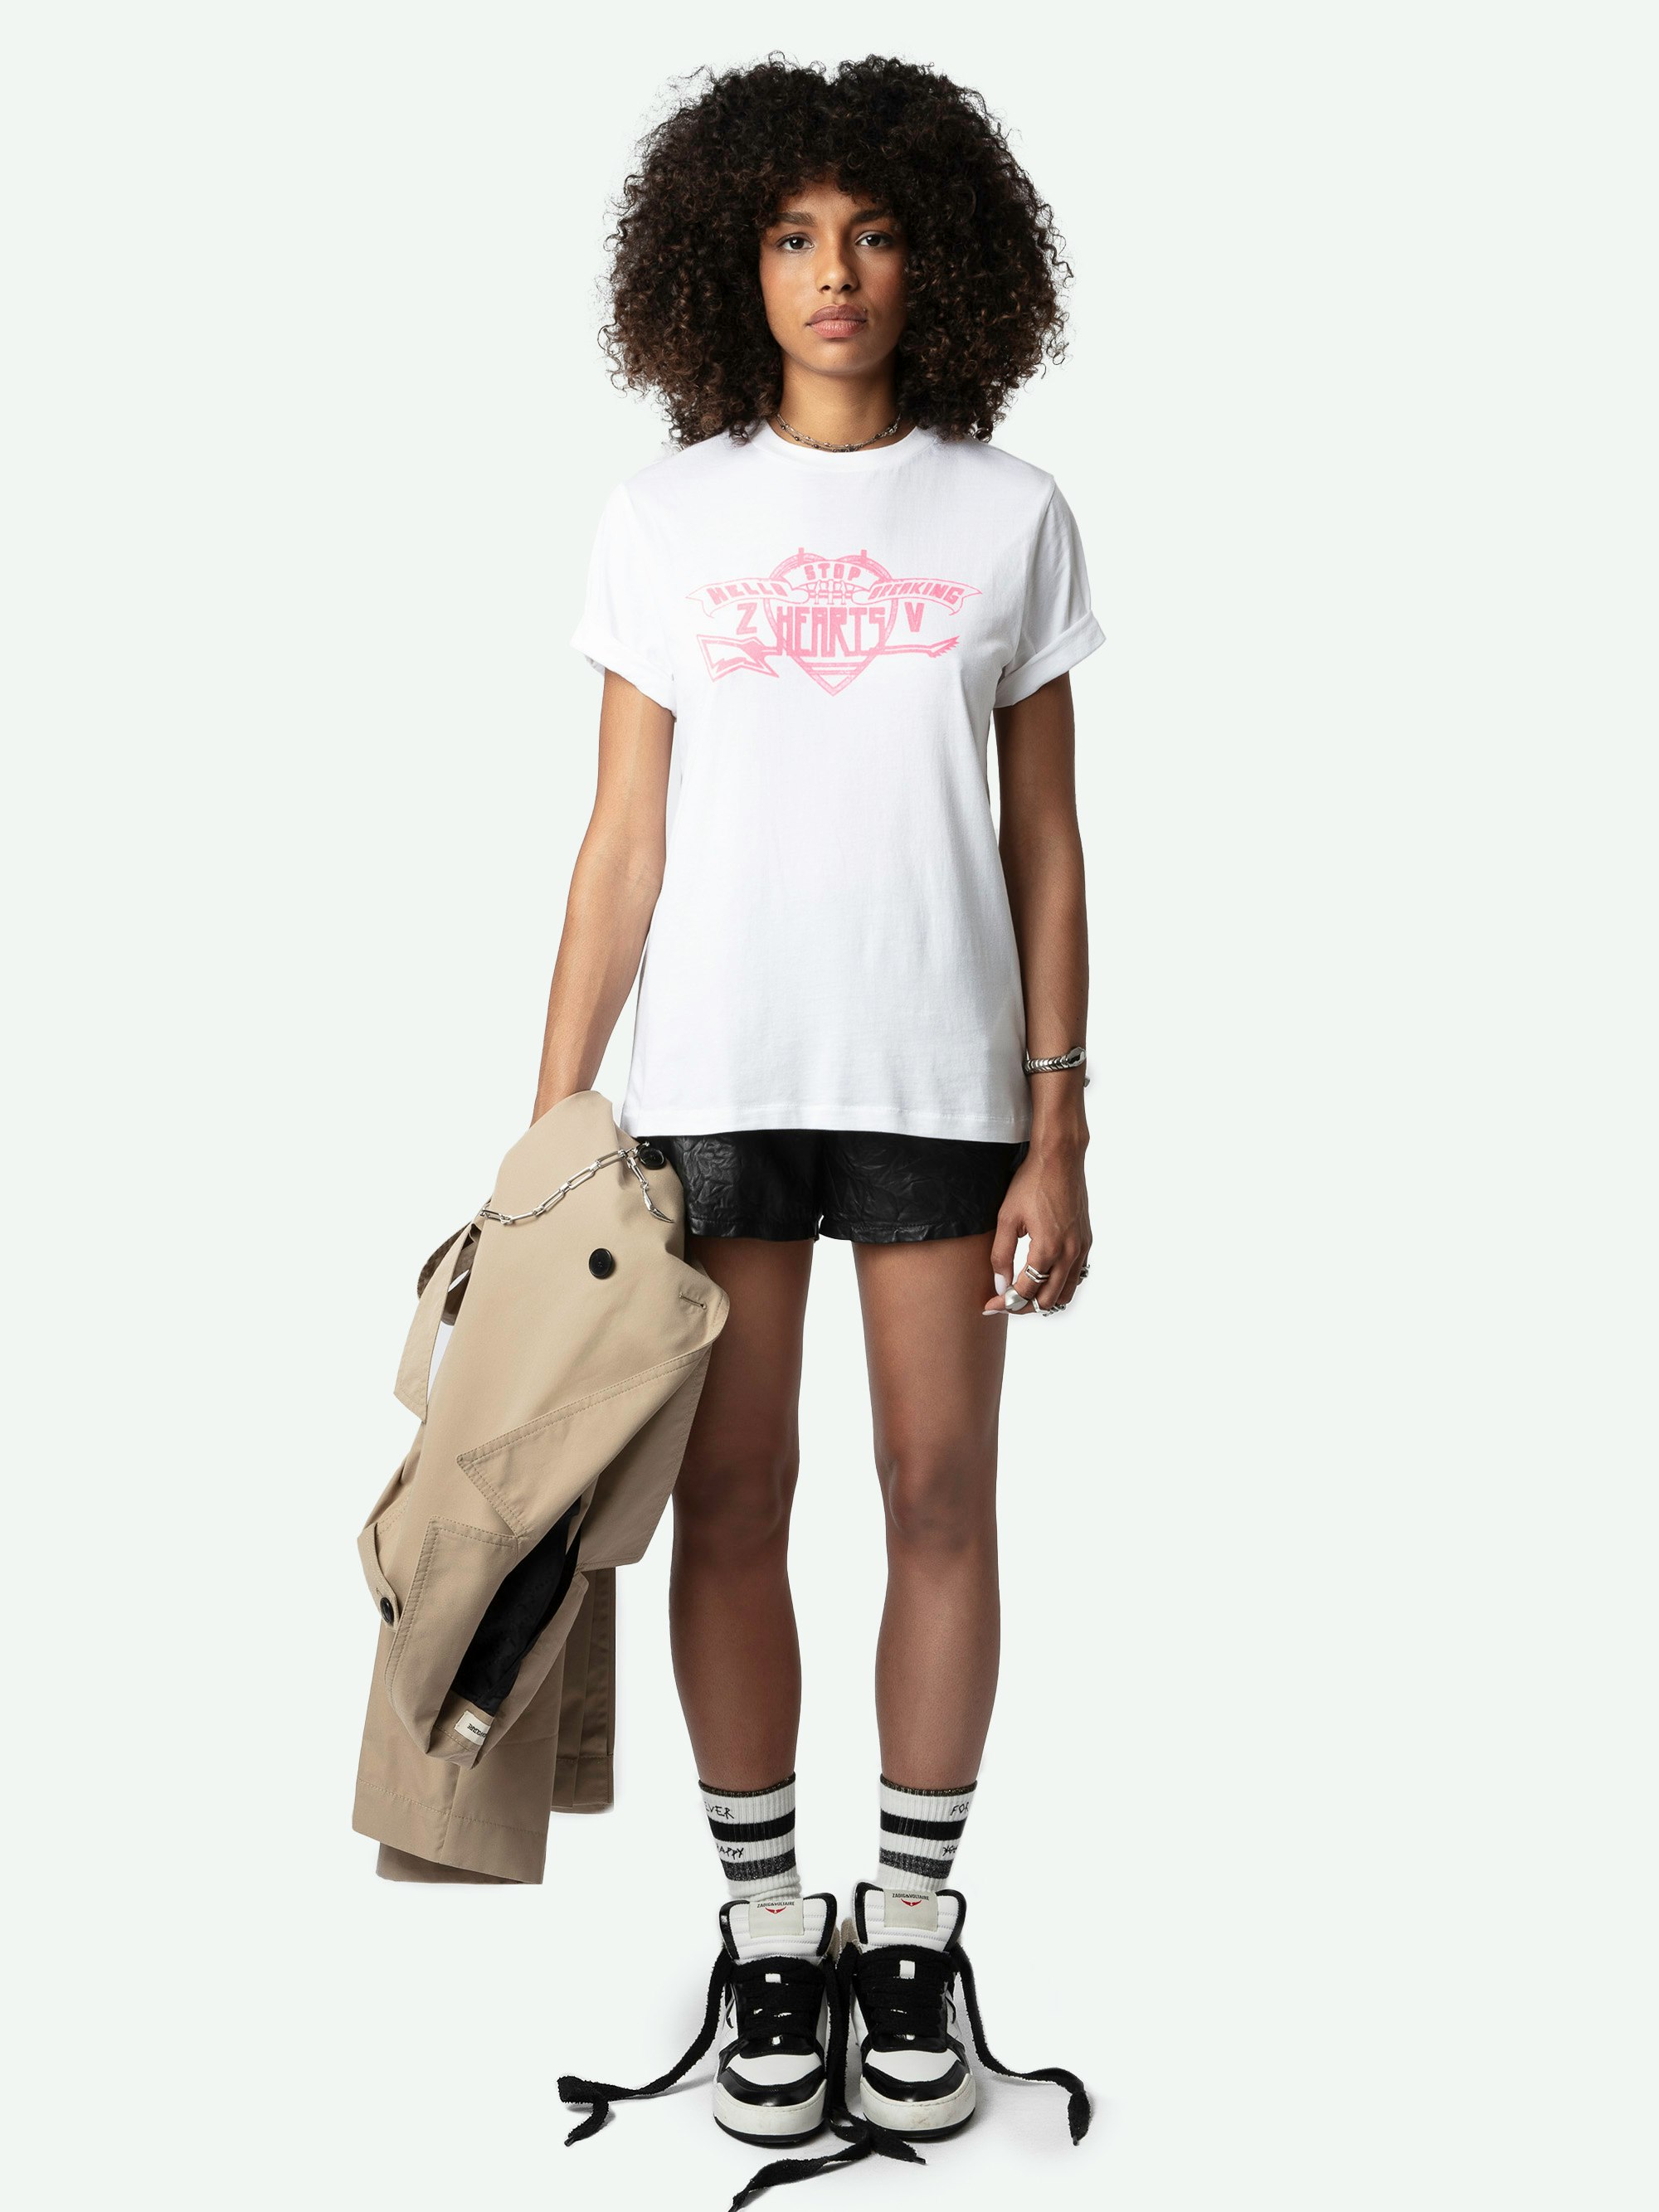 Edwin Hearts T-shirt - Short-sleeved, oversized white organic cotton T-shirt with "Hello Stop Breaking Hearts" flocked on front.